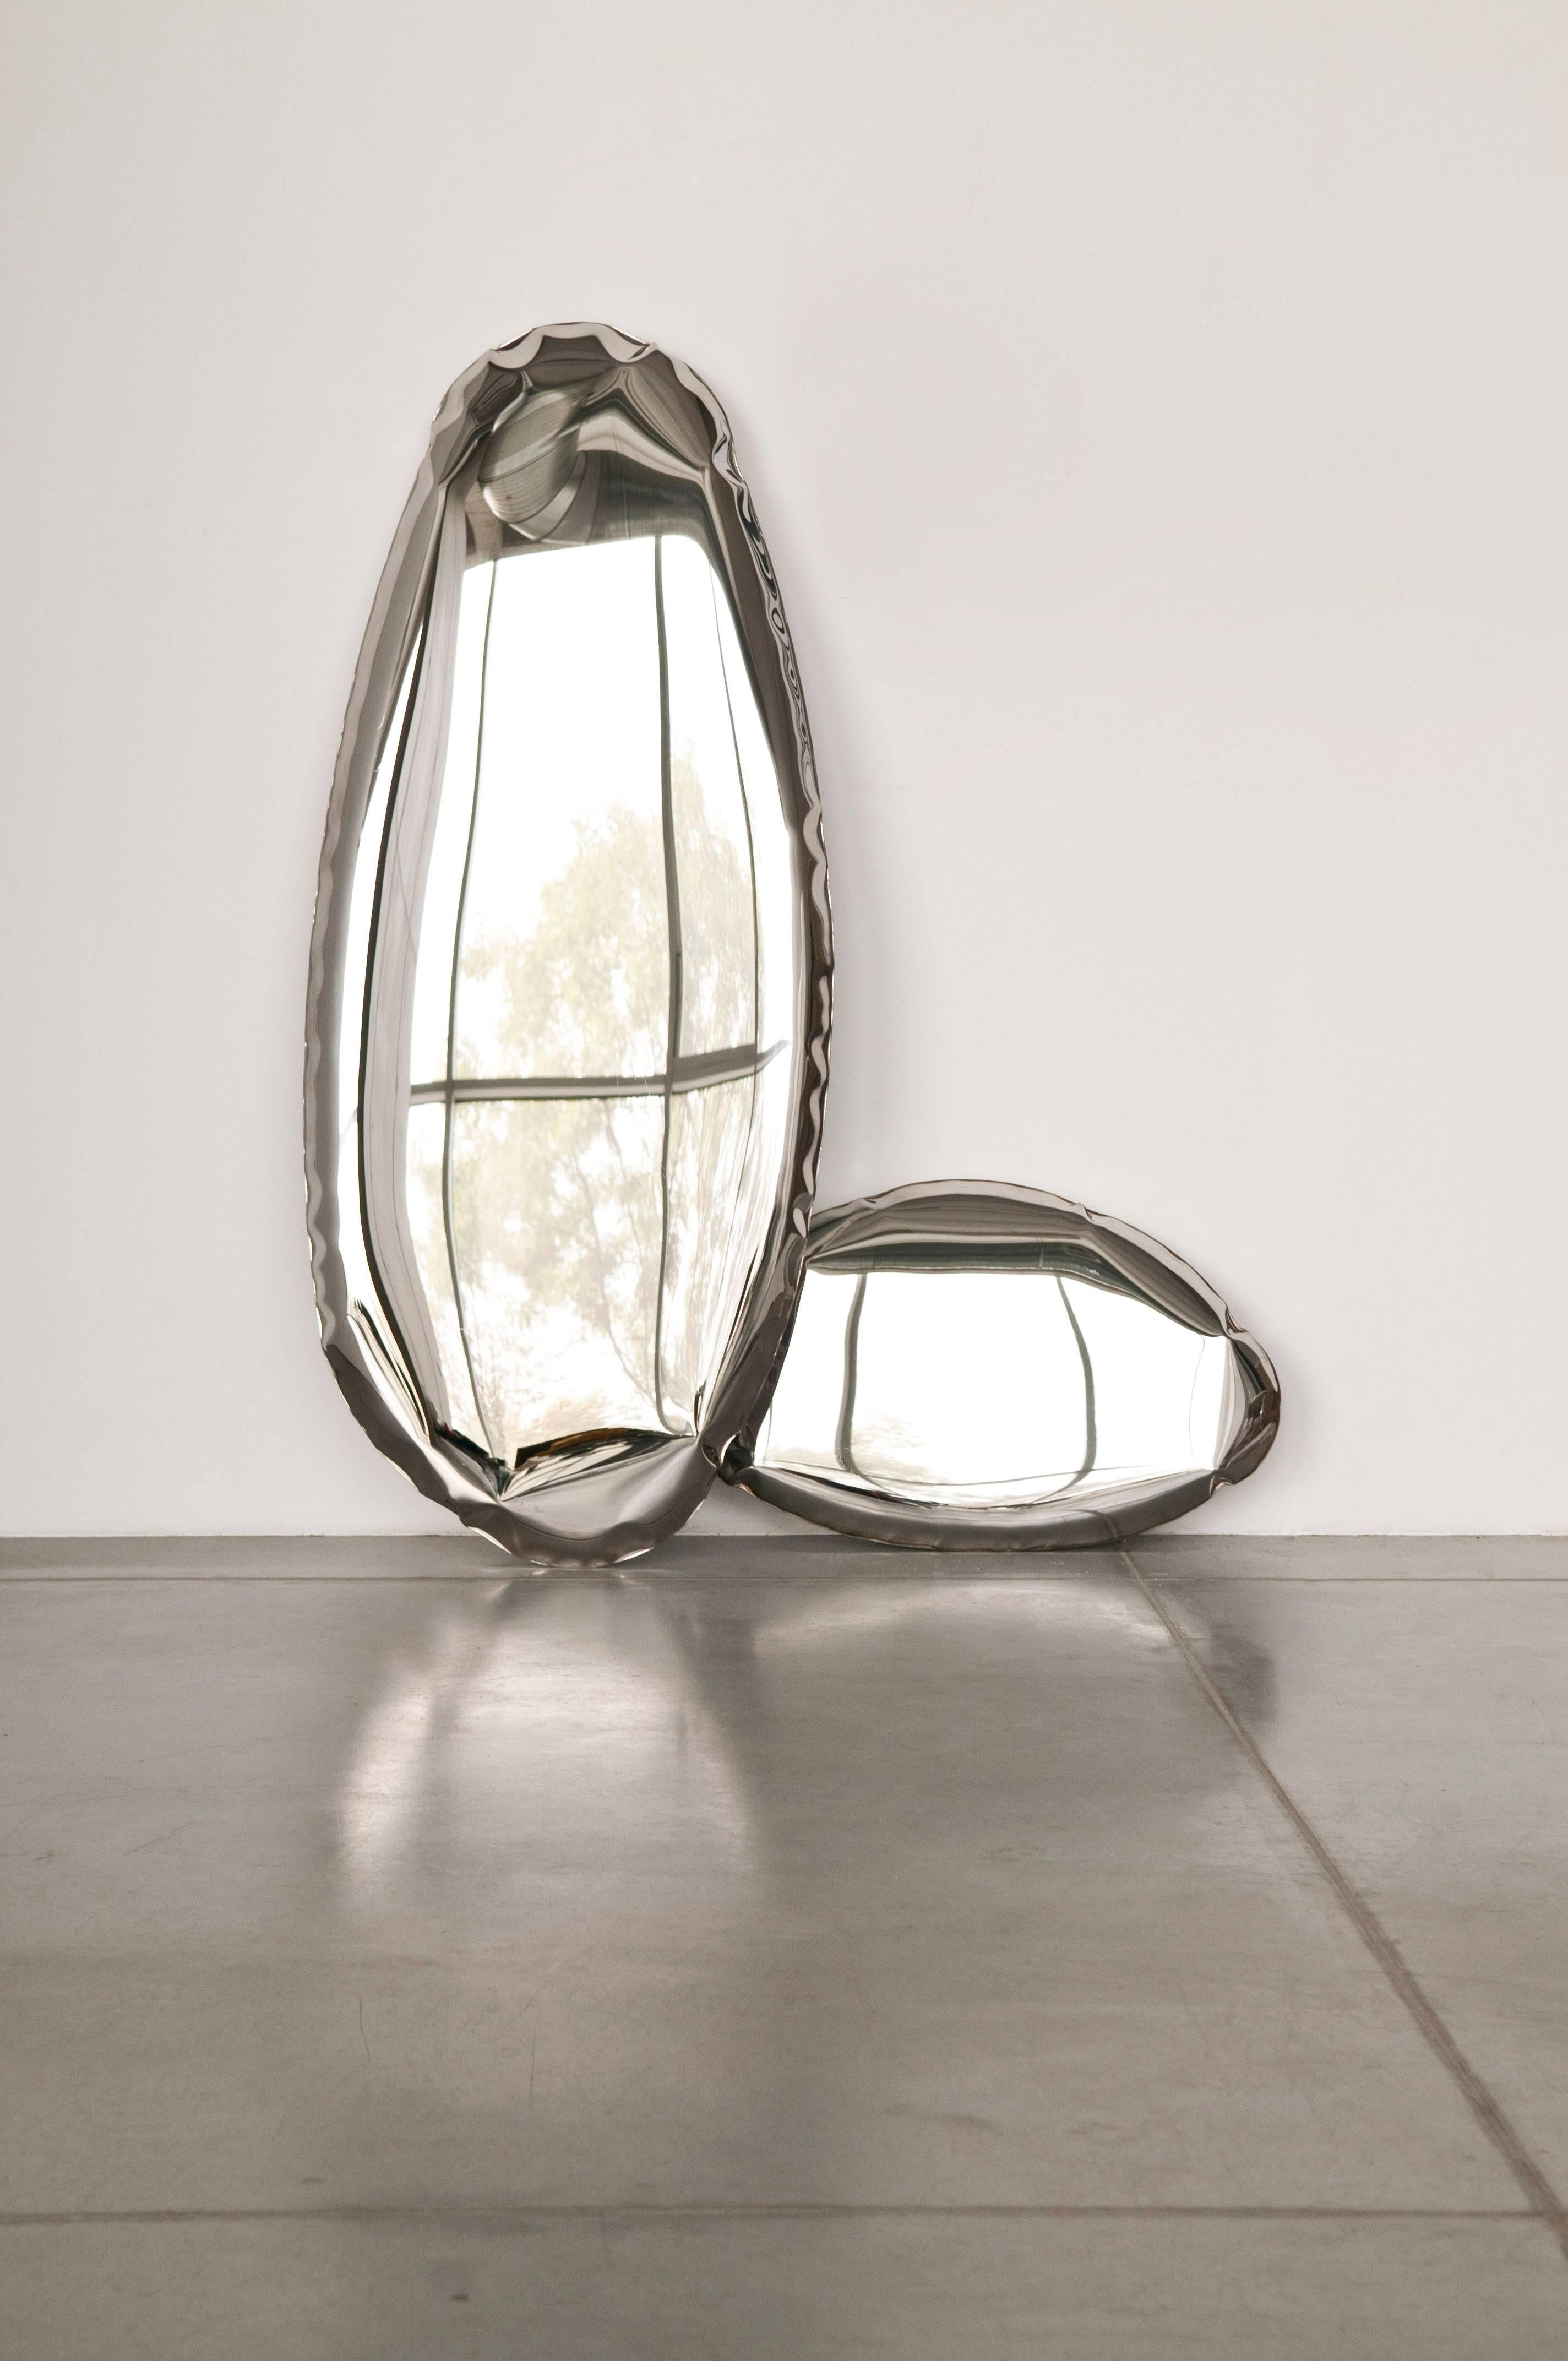 Organic Modern Mirror 'Tafla O4.5' in Polished Stainless Steel by Zieta (in stock) For Sale